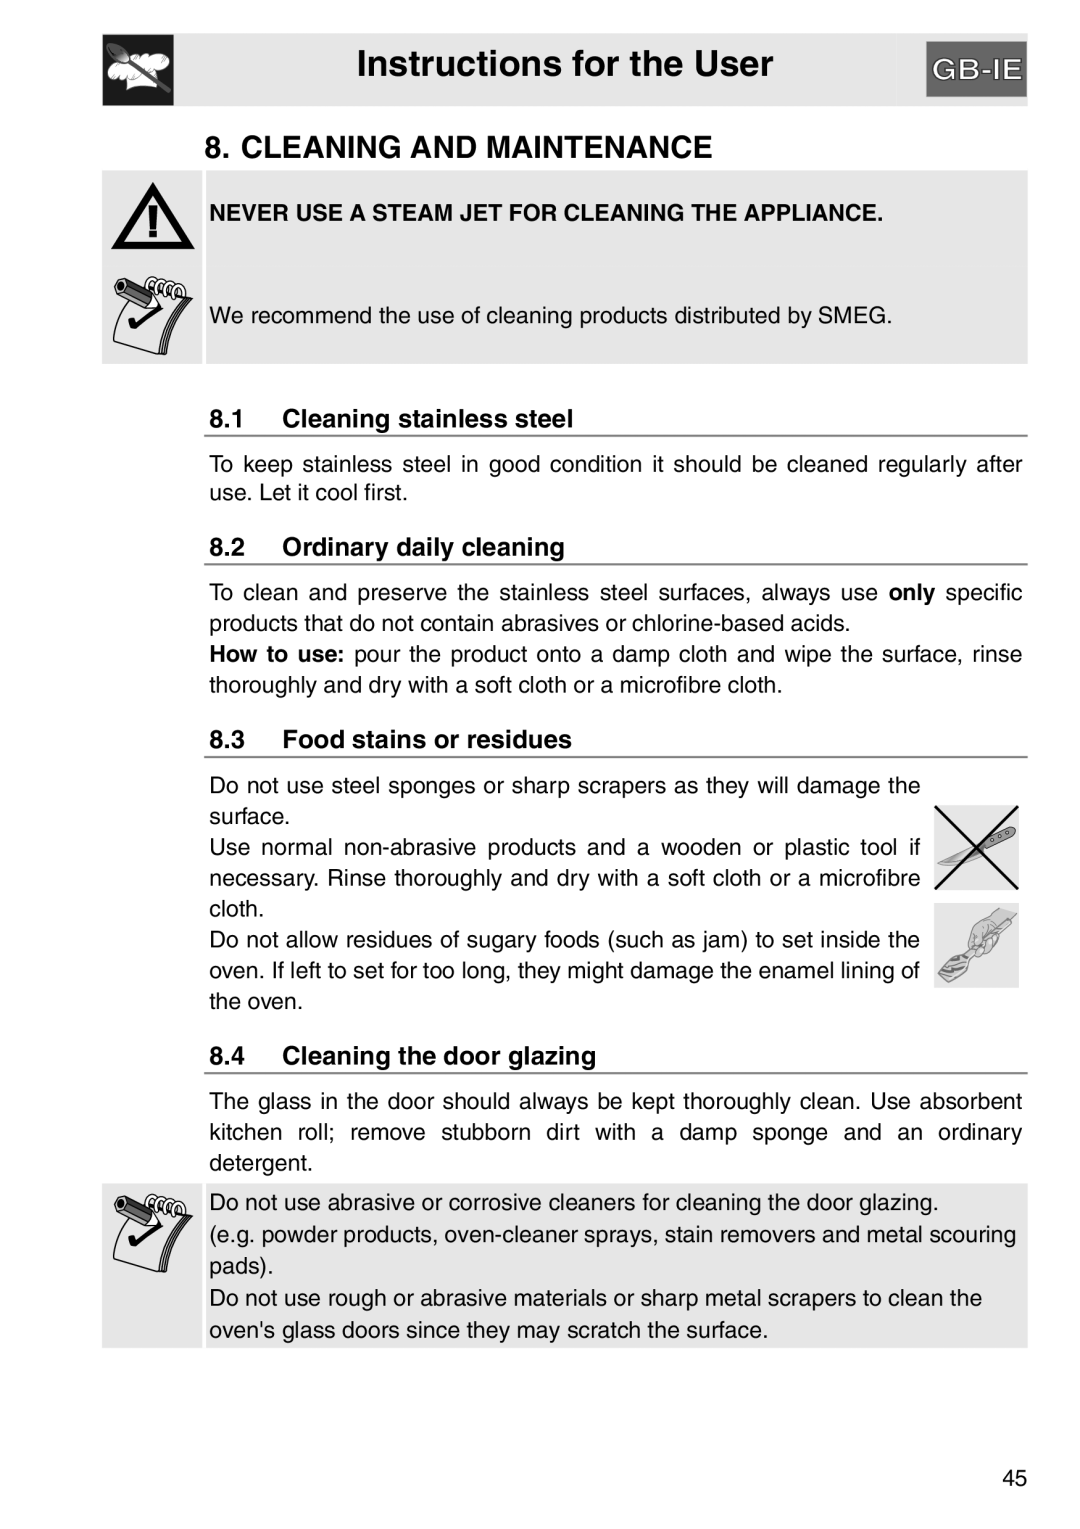 Smeg SAP112-8 Cleaning And Maintenance, Instructions for the User, 8.1Cleaning stainless steel, 8.2Ordinary daily cleaning 